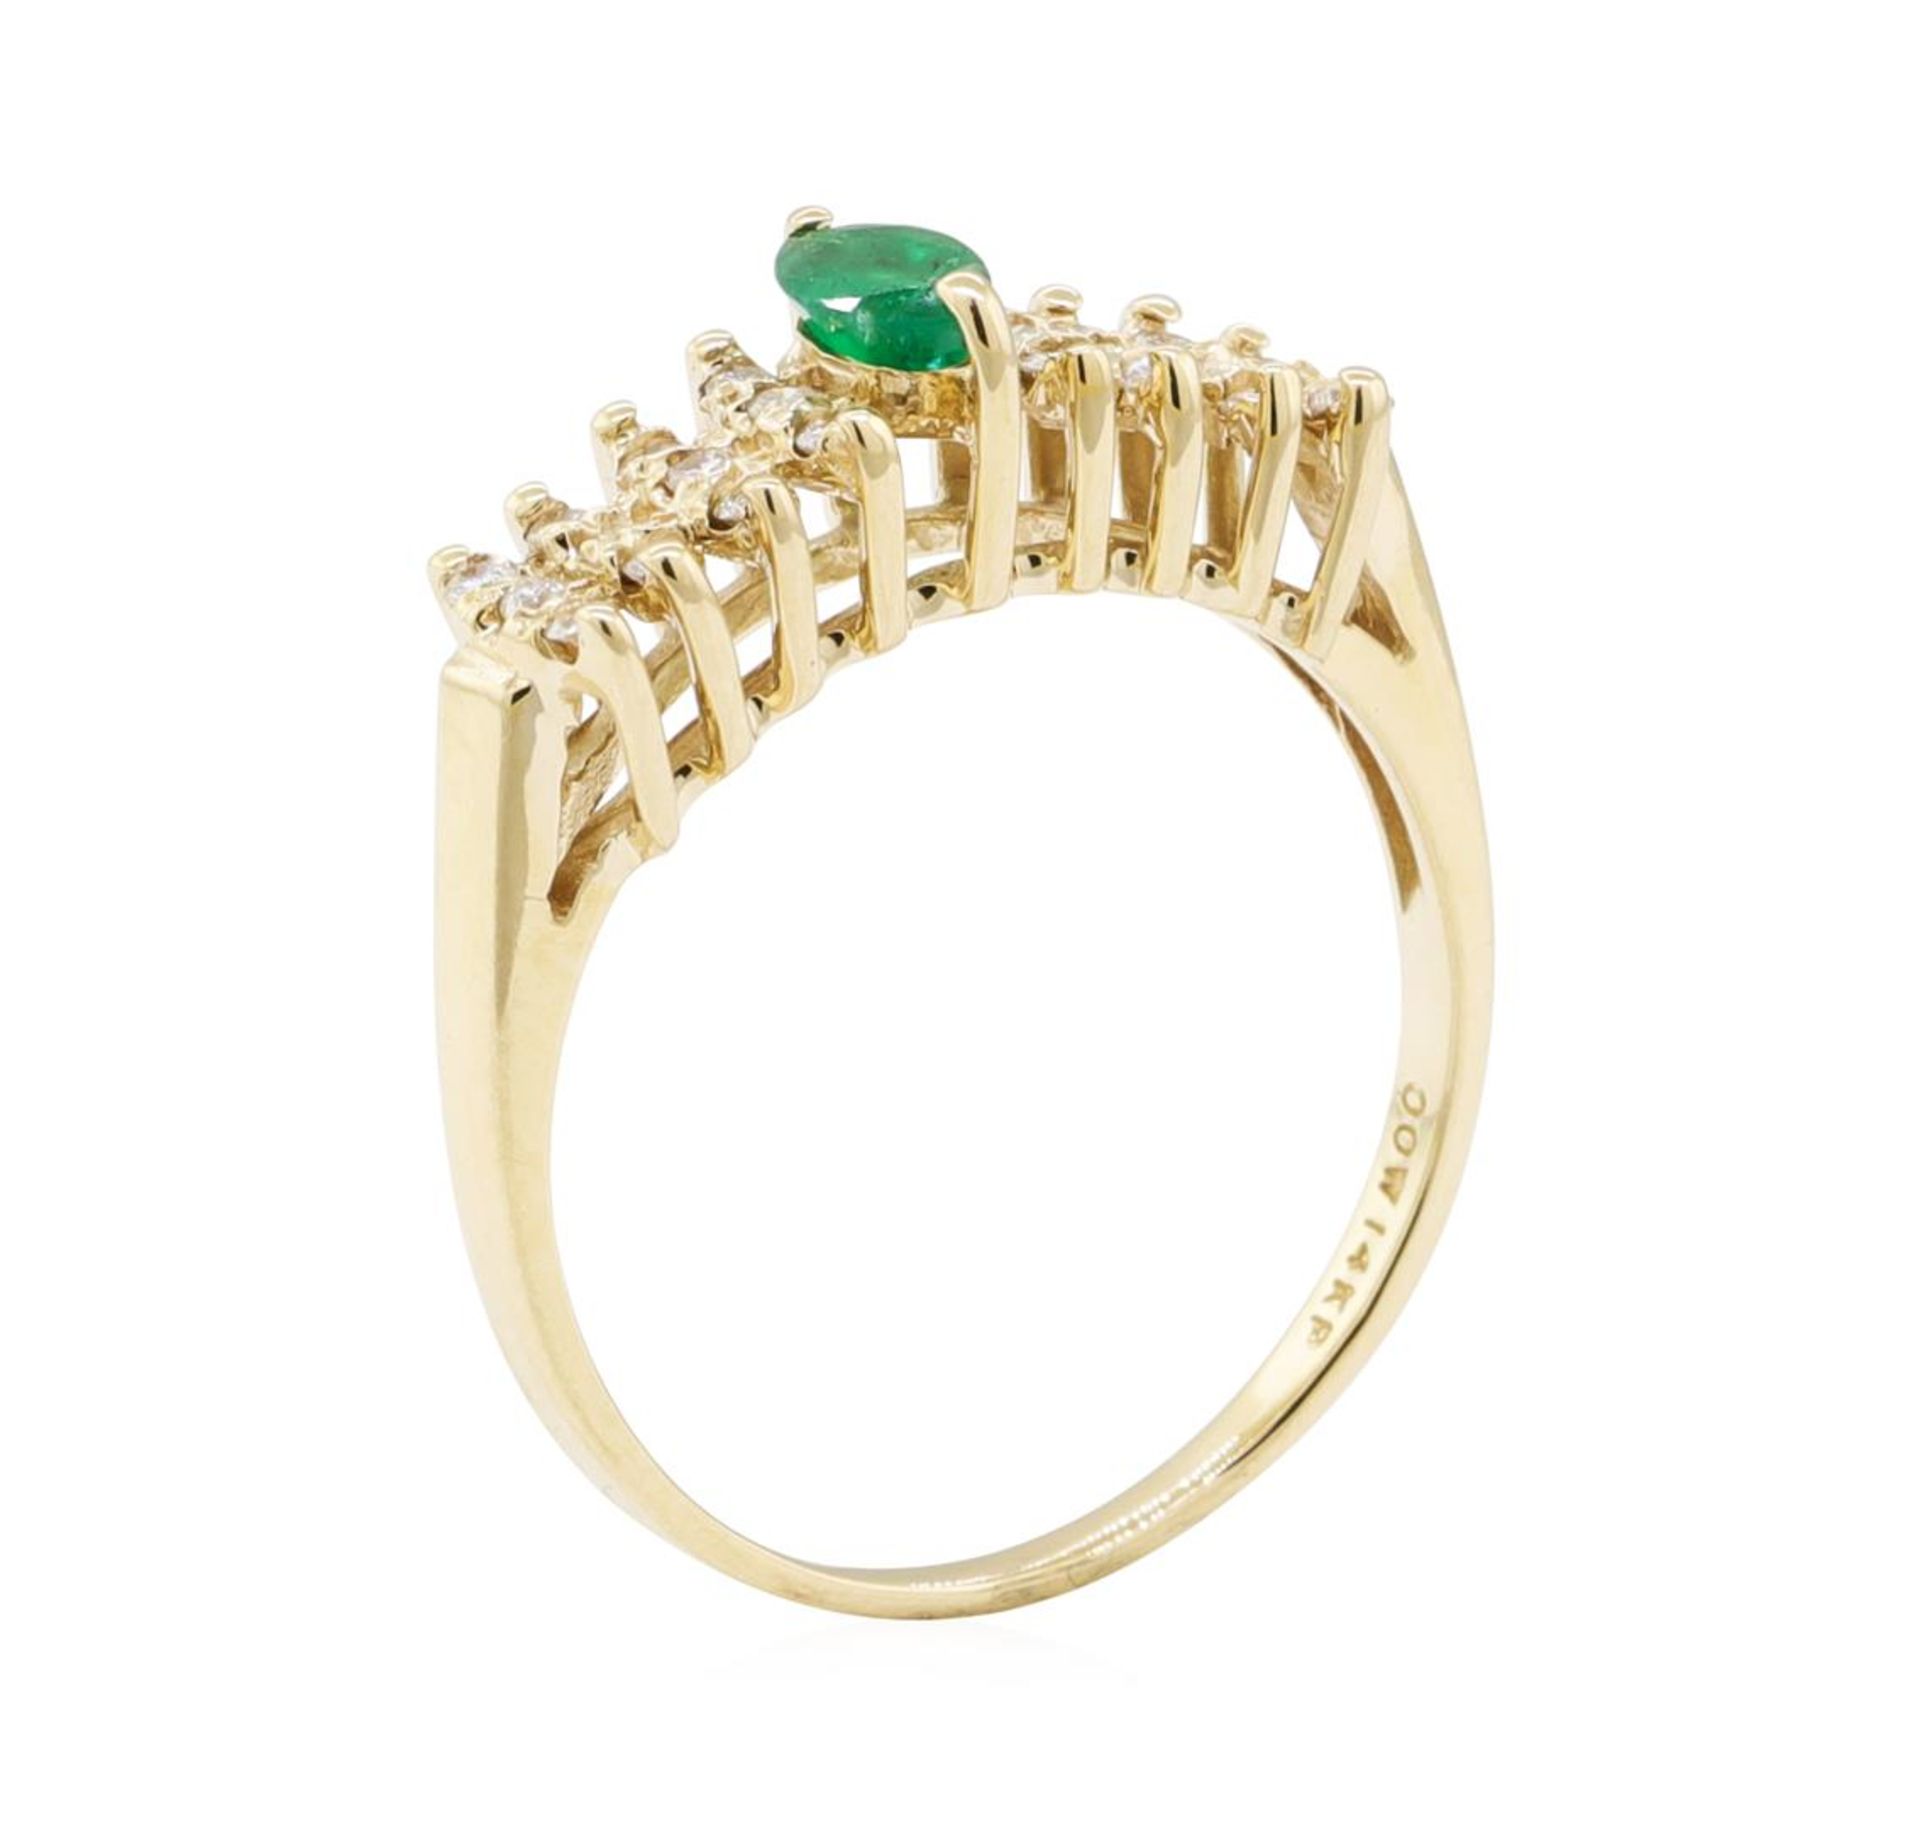 0.50 ctw Diamond and Emerald Ring - 14KT Yellow Gold - Image 4 of 4